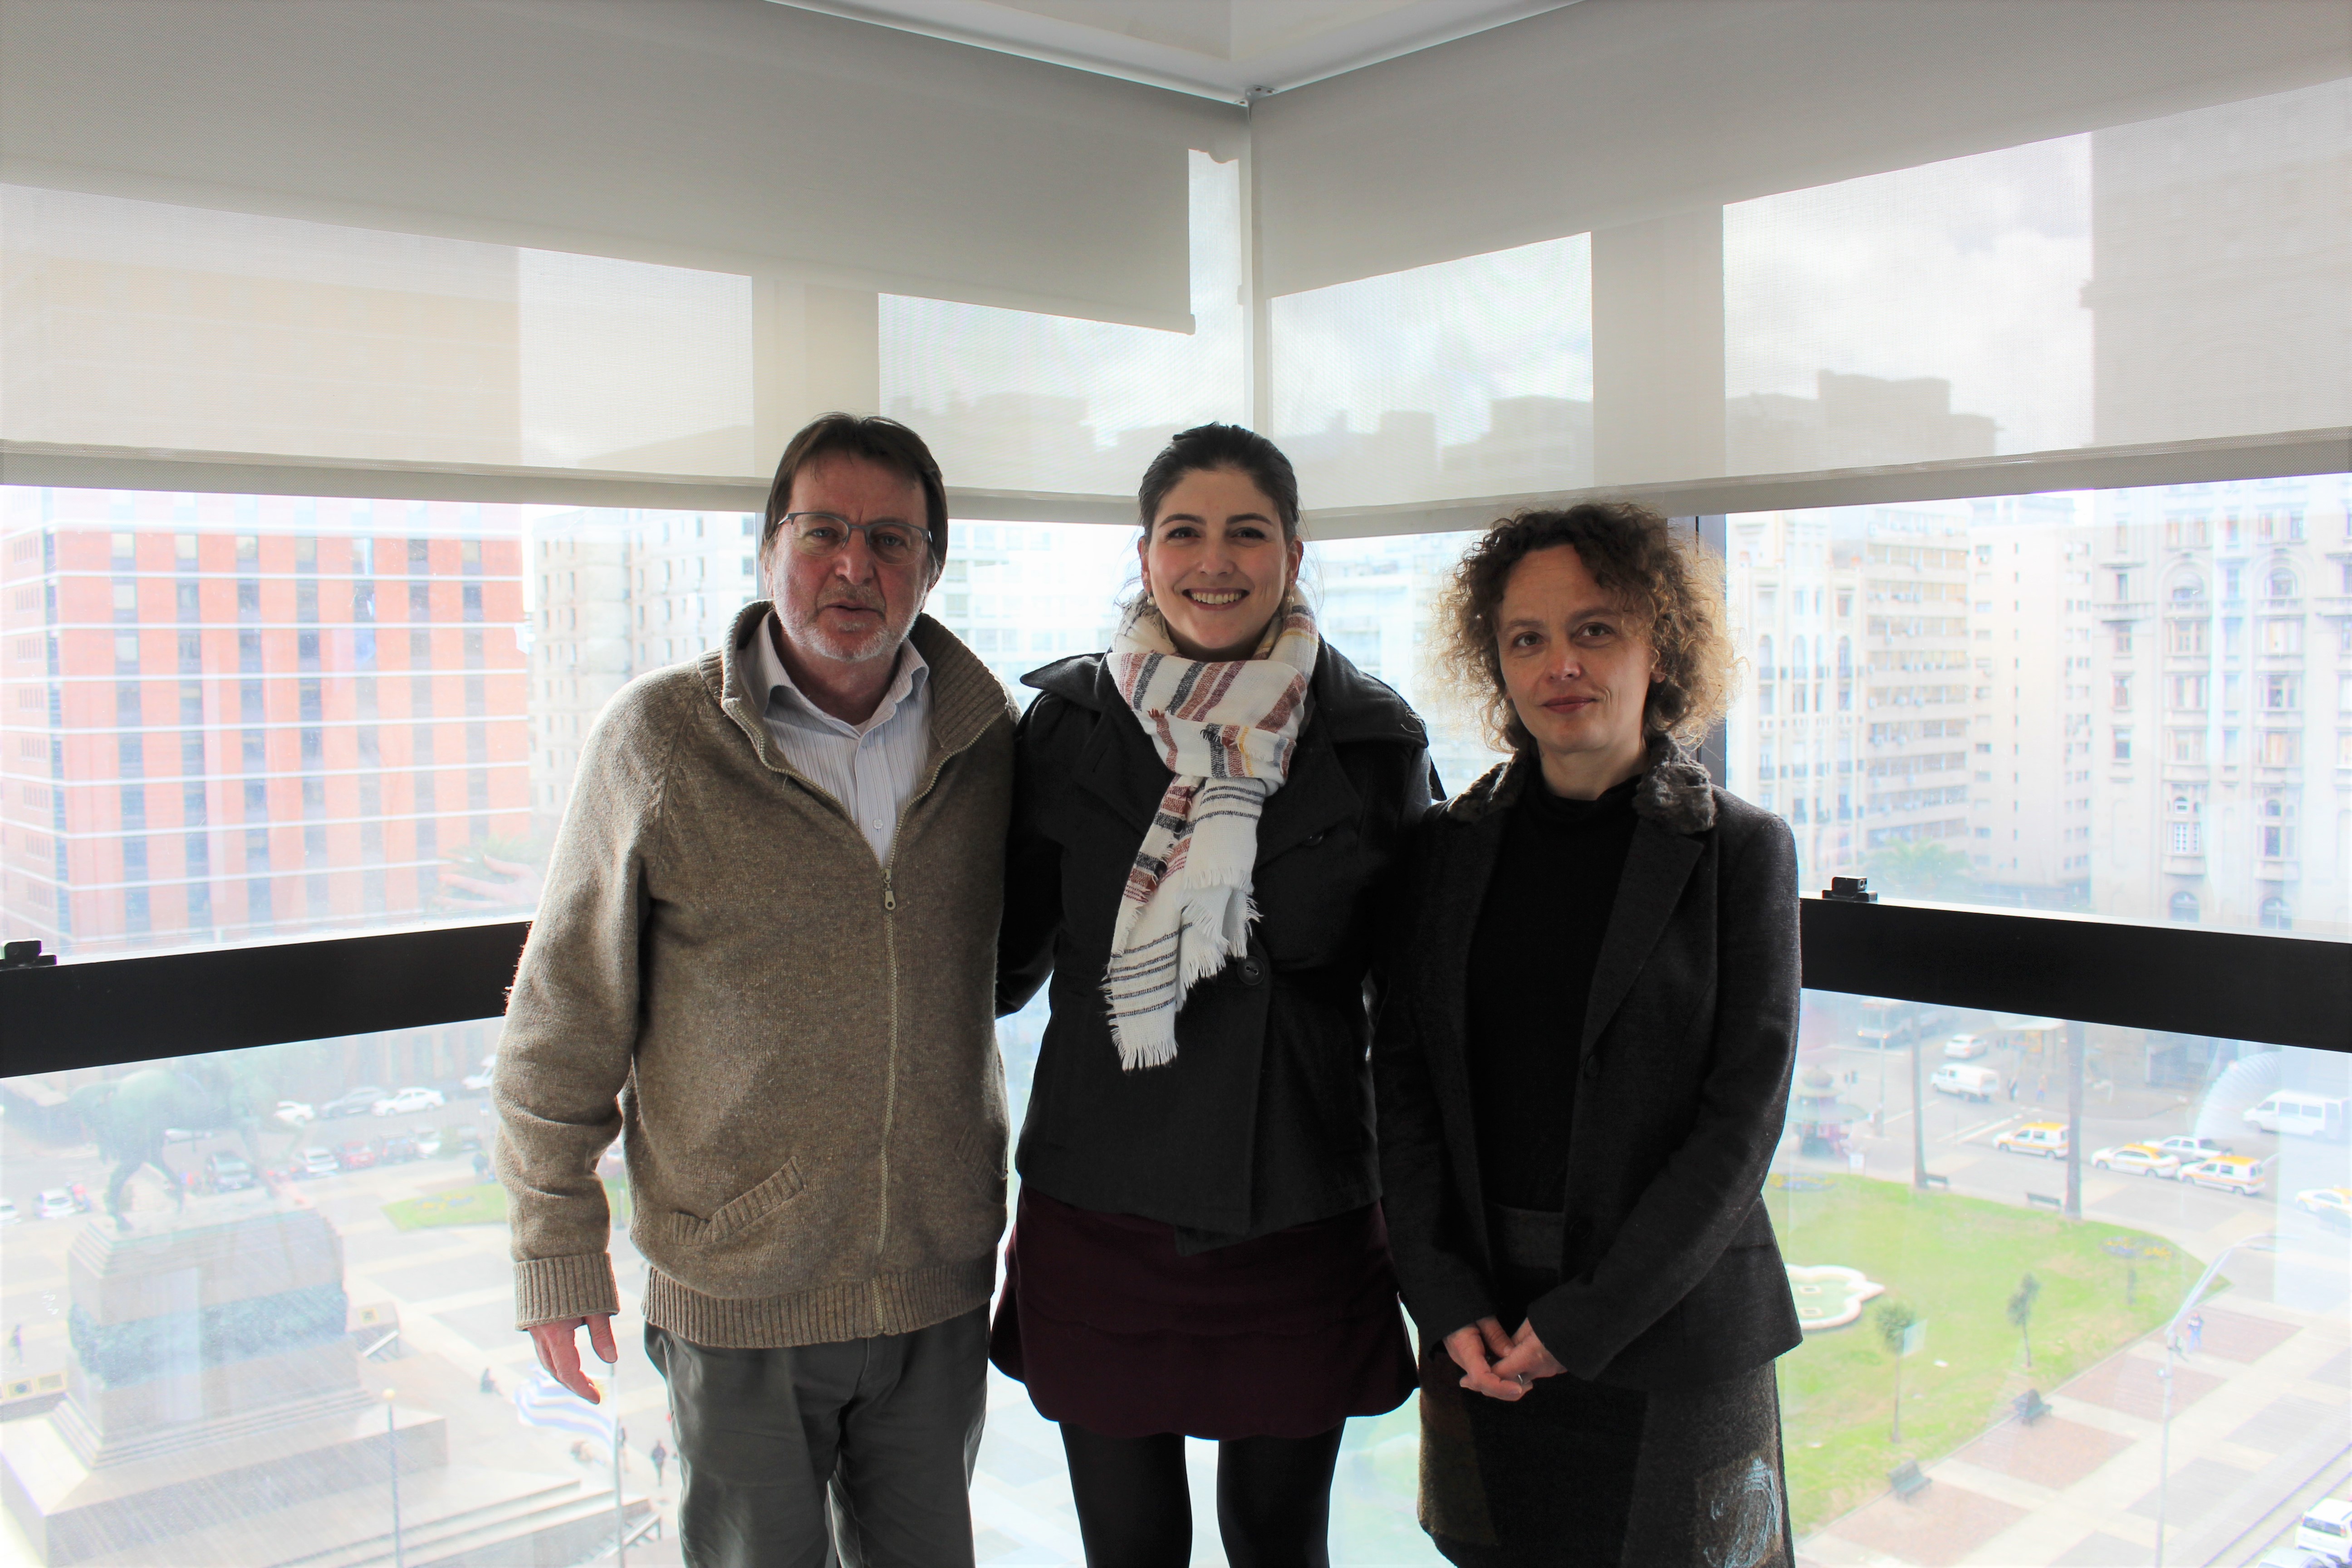 Eduardo Manta, State Secretary for Science and Technology in Uruguay, with Laura Redondo and Kathrin Winkler from the DFG Office Latin America